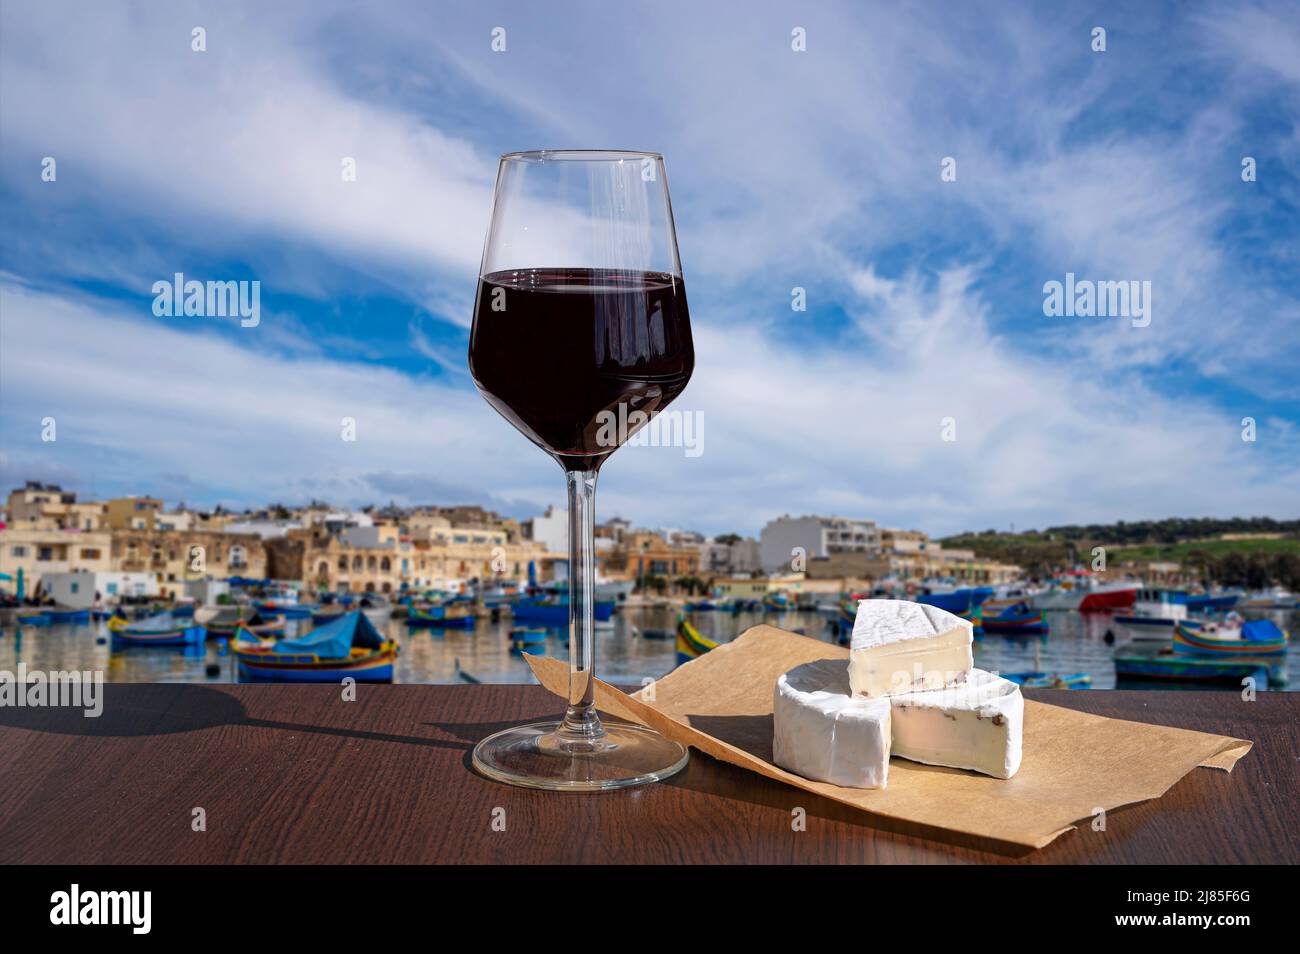 Glass of red wine with brie cheese with view of harbor with traditional boats and historic city center in Marsaxlokk, Malta Stock Photo